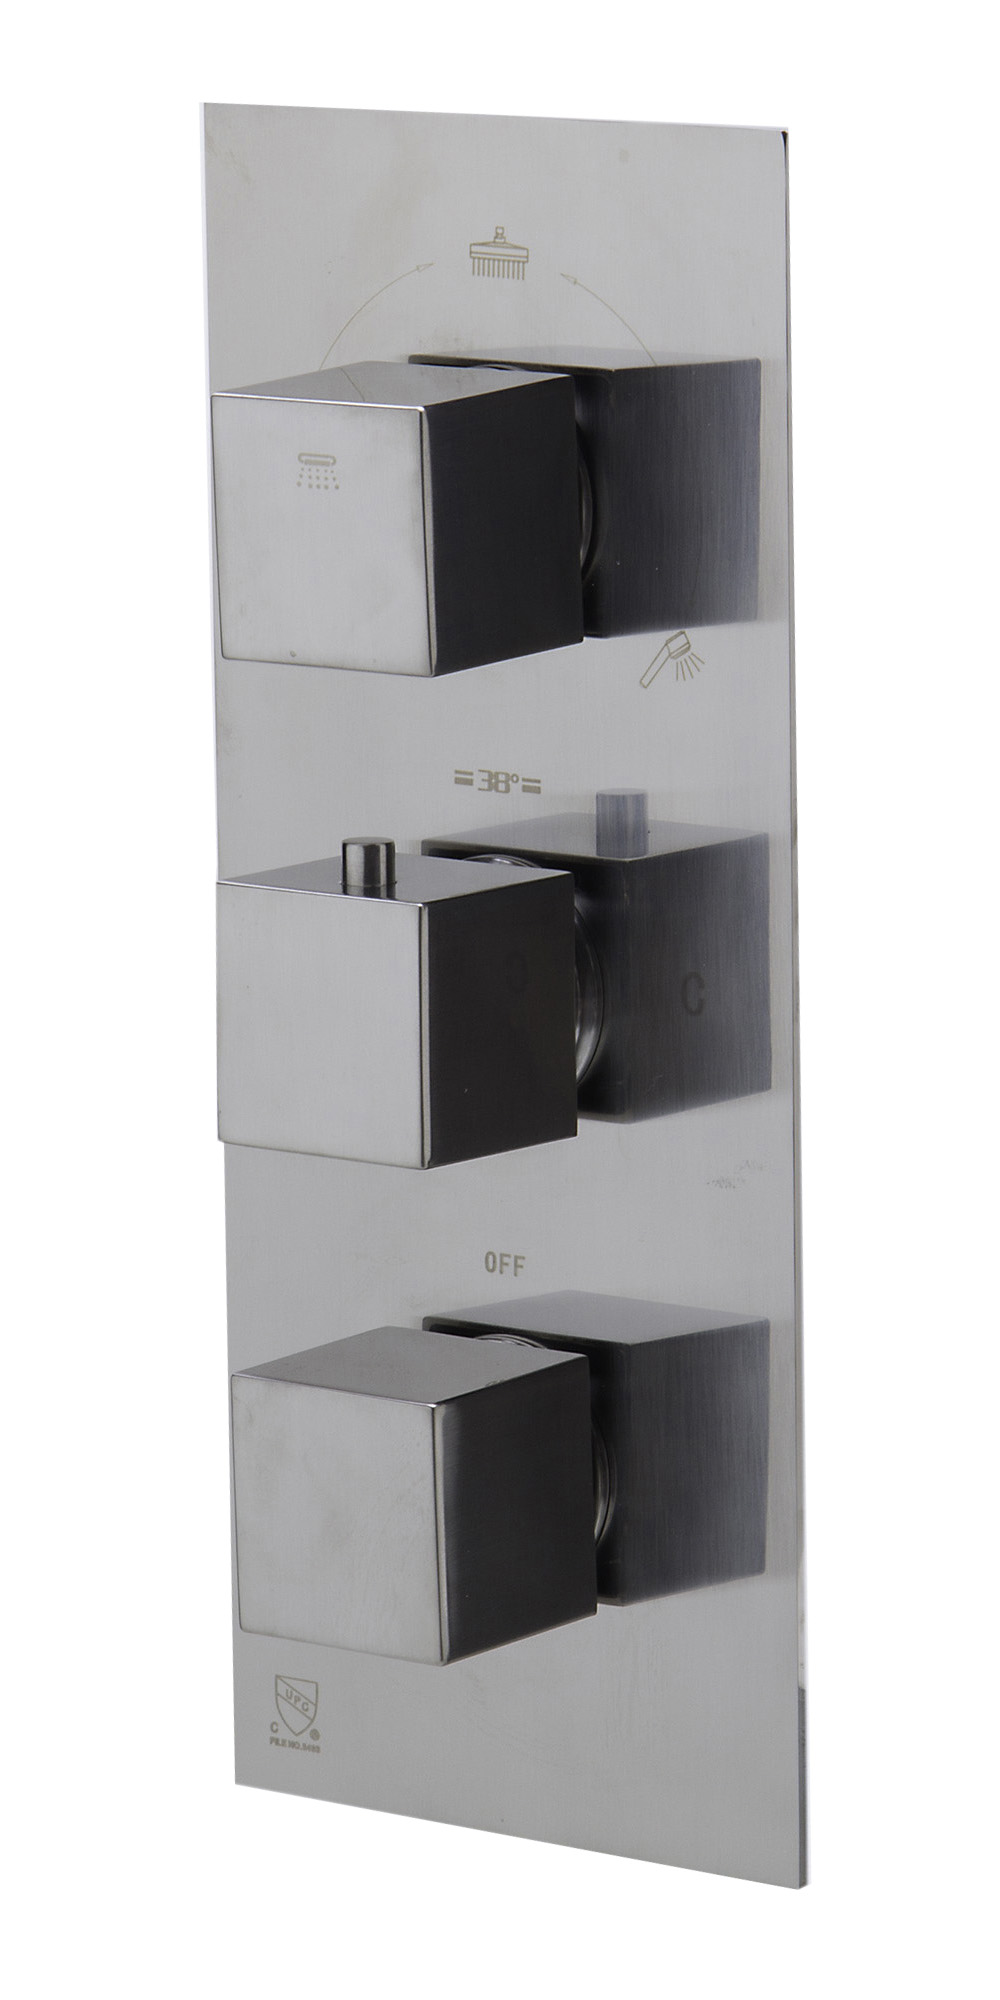 ALFI brand AB2801-BN Brushed Nickel Concealed 3-Way Thermostatic Valve Shower Mixer Square Knobs